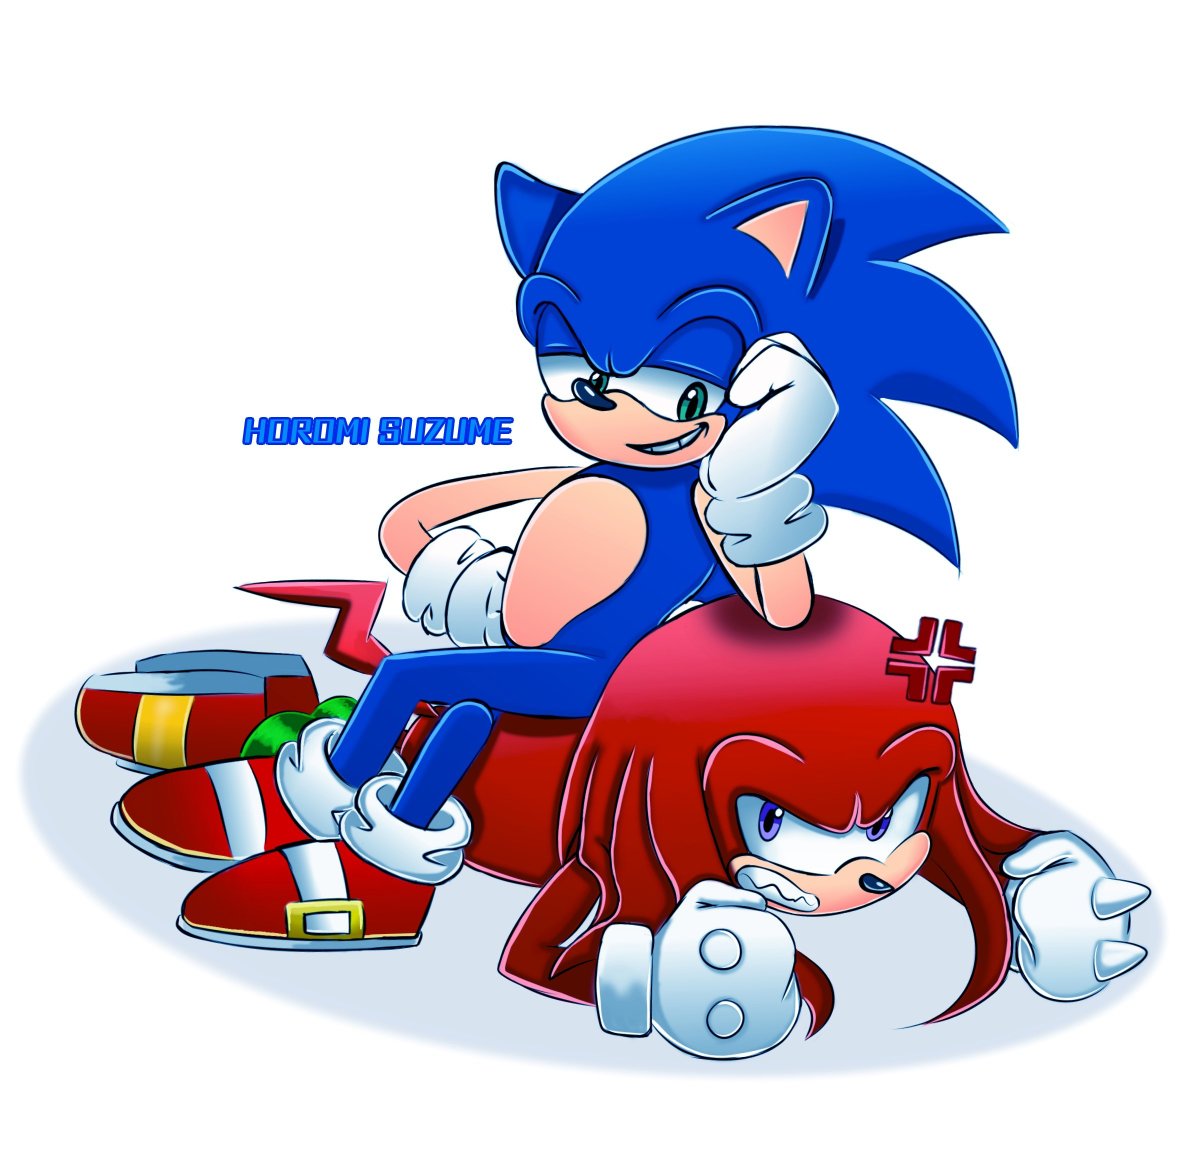 I’m learning to draw Sonic characters again after a long time, but in general, who would you like to see in my style??(´･ω･`)?
#SonicTheHedgehog #sonknux #knucklestheechidna #Sonicfanart #Sonicart #sonicxknuckles